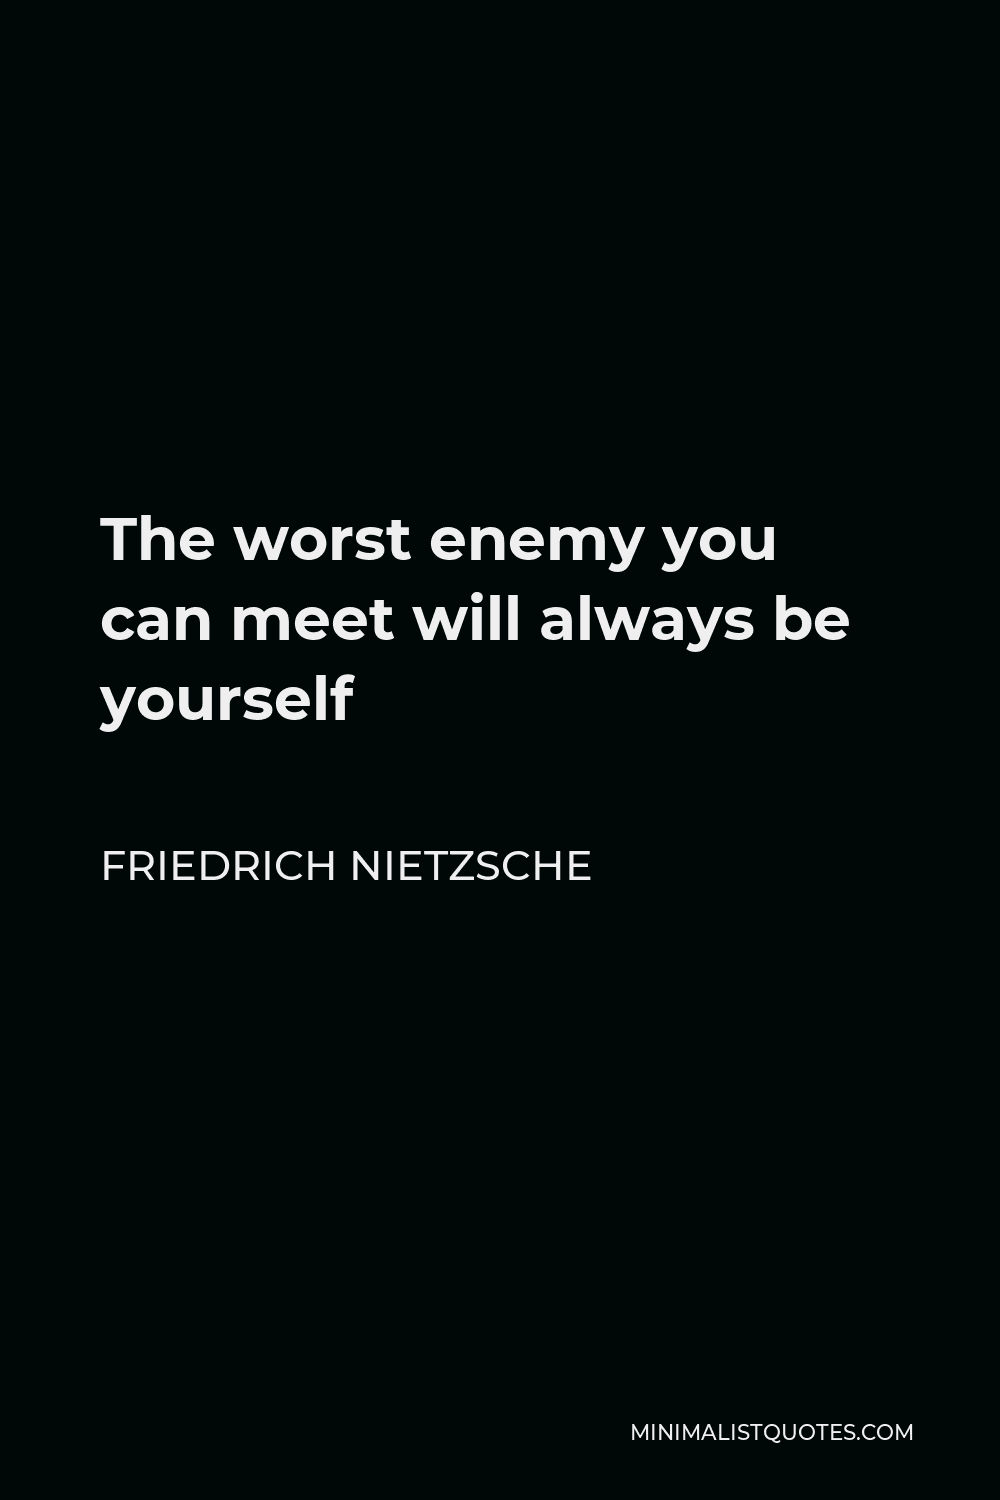 Friedrich Nietzsche Quote - The worst enemy you can meet will always be yourself